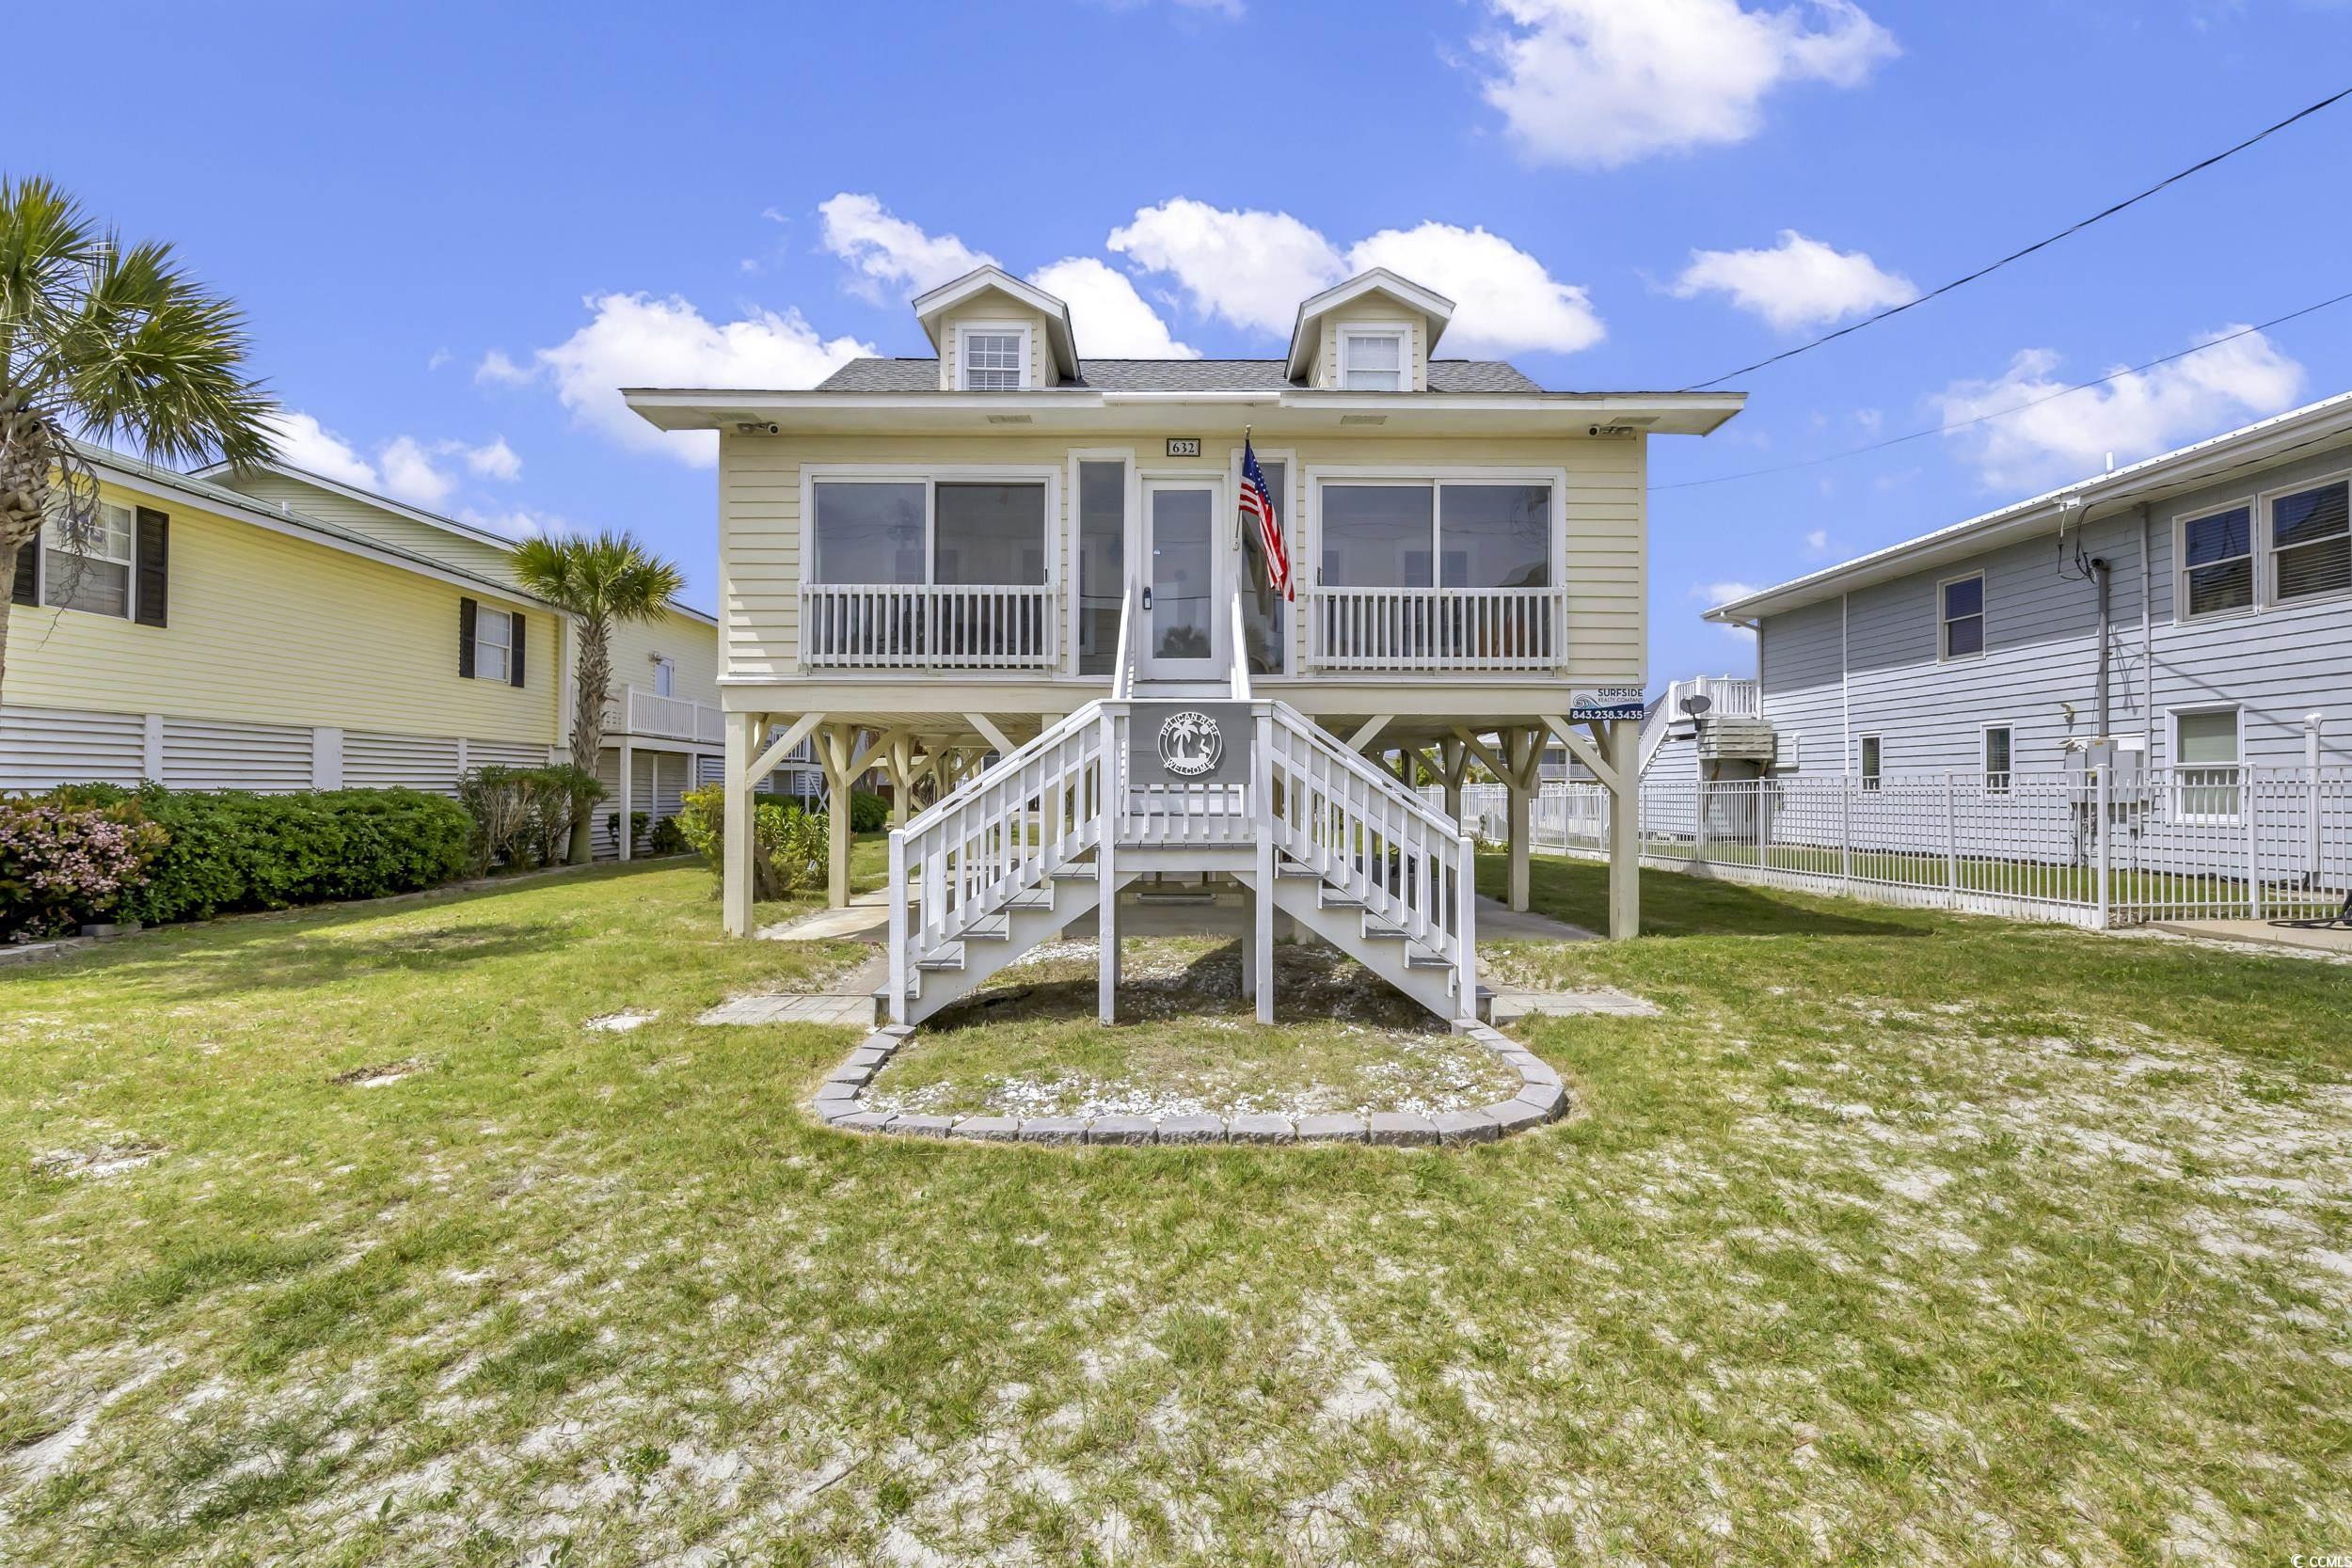 open house, saturday, april 27th from 12-2!  stop looking, you have just found your next forever or investment property in this charming 3 bedroom 2 bathroom raised beach house! from an unobstructed ocean view to have an oversized lot, all you will need to do is pack some sunscreen your beach house is waiting for you. the home sits 2nd row beach but you can sit on your enclosed porch and watch the ocean while drinking your coffee in the morning, enjoying an evening cocktail or playing board games with your kids. inside the home you will enjoy an open living space, hard wood floors, main bedroom on the first level with two additional bedrooms and bathrooms on the 2nd floor. the oversized lot gives you the ability to build your dream pool or even expand the home to accommodate larger groups. under the home there is a large storage room for all your beach toys plus an outdoor shower. the area under the house is large enough to enjoy outside activities in the shade.  public beach access is only a few steps away. do you enjoy the inlet area, your new home is only a couple minutes away from you having a day on the inlet too.  don't miss your chance to scoop this home up! you will regret it! schedule your showing today.